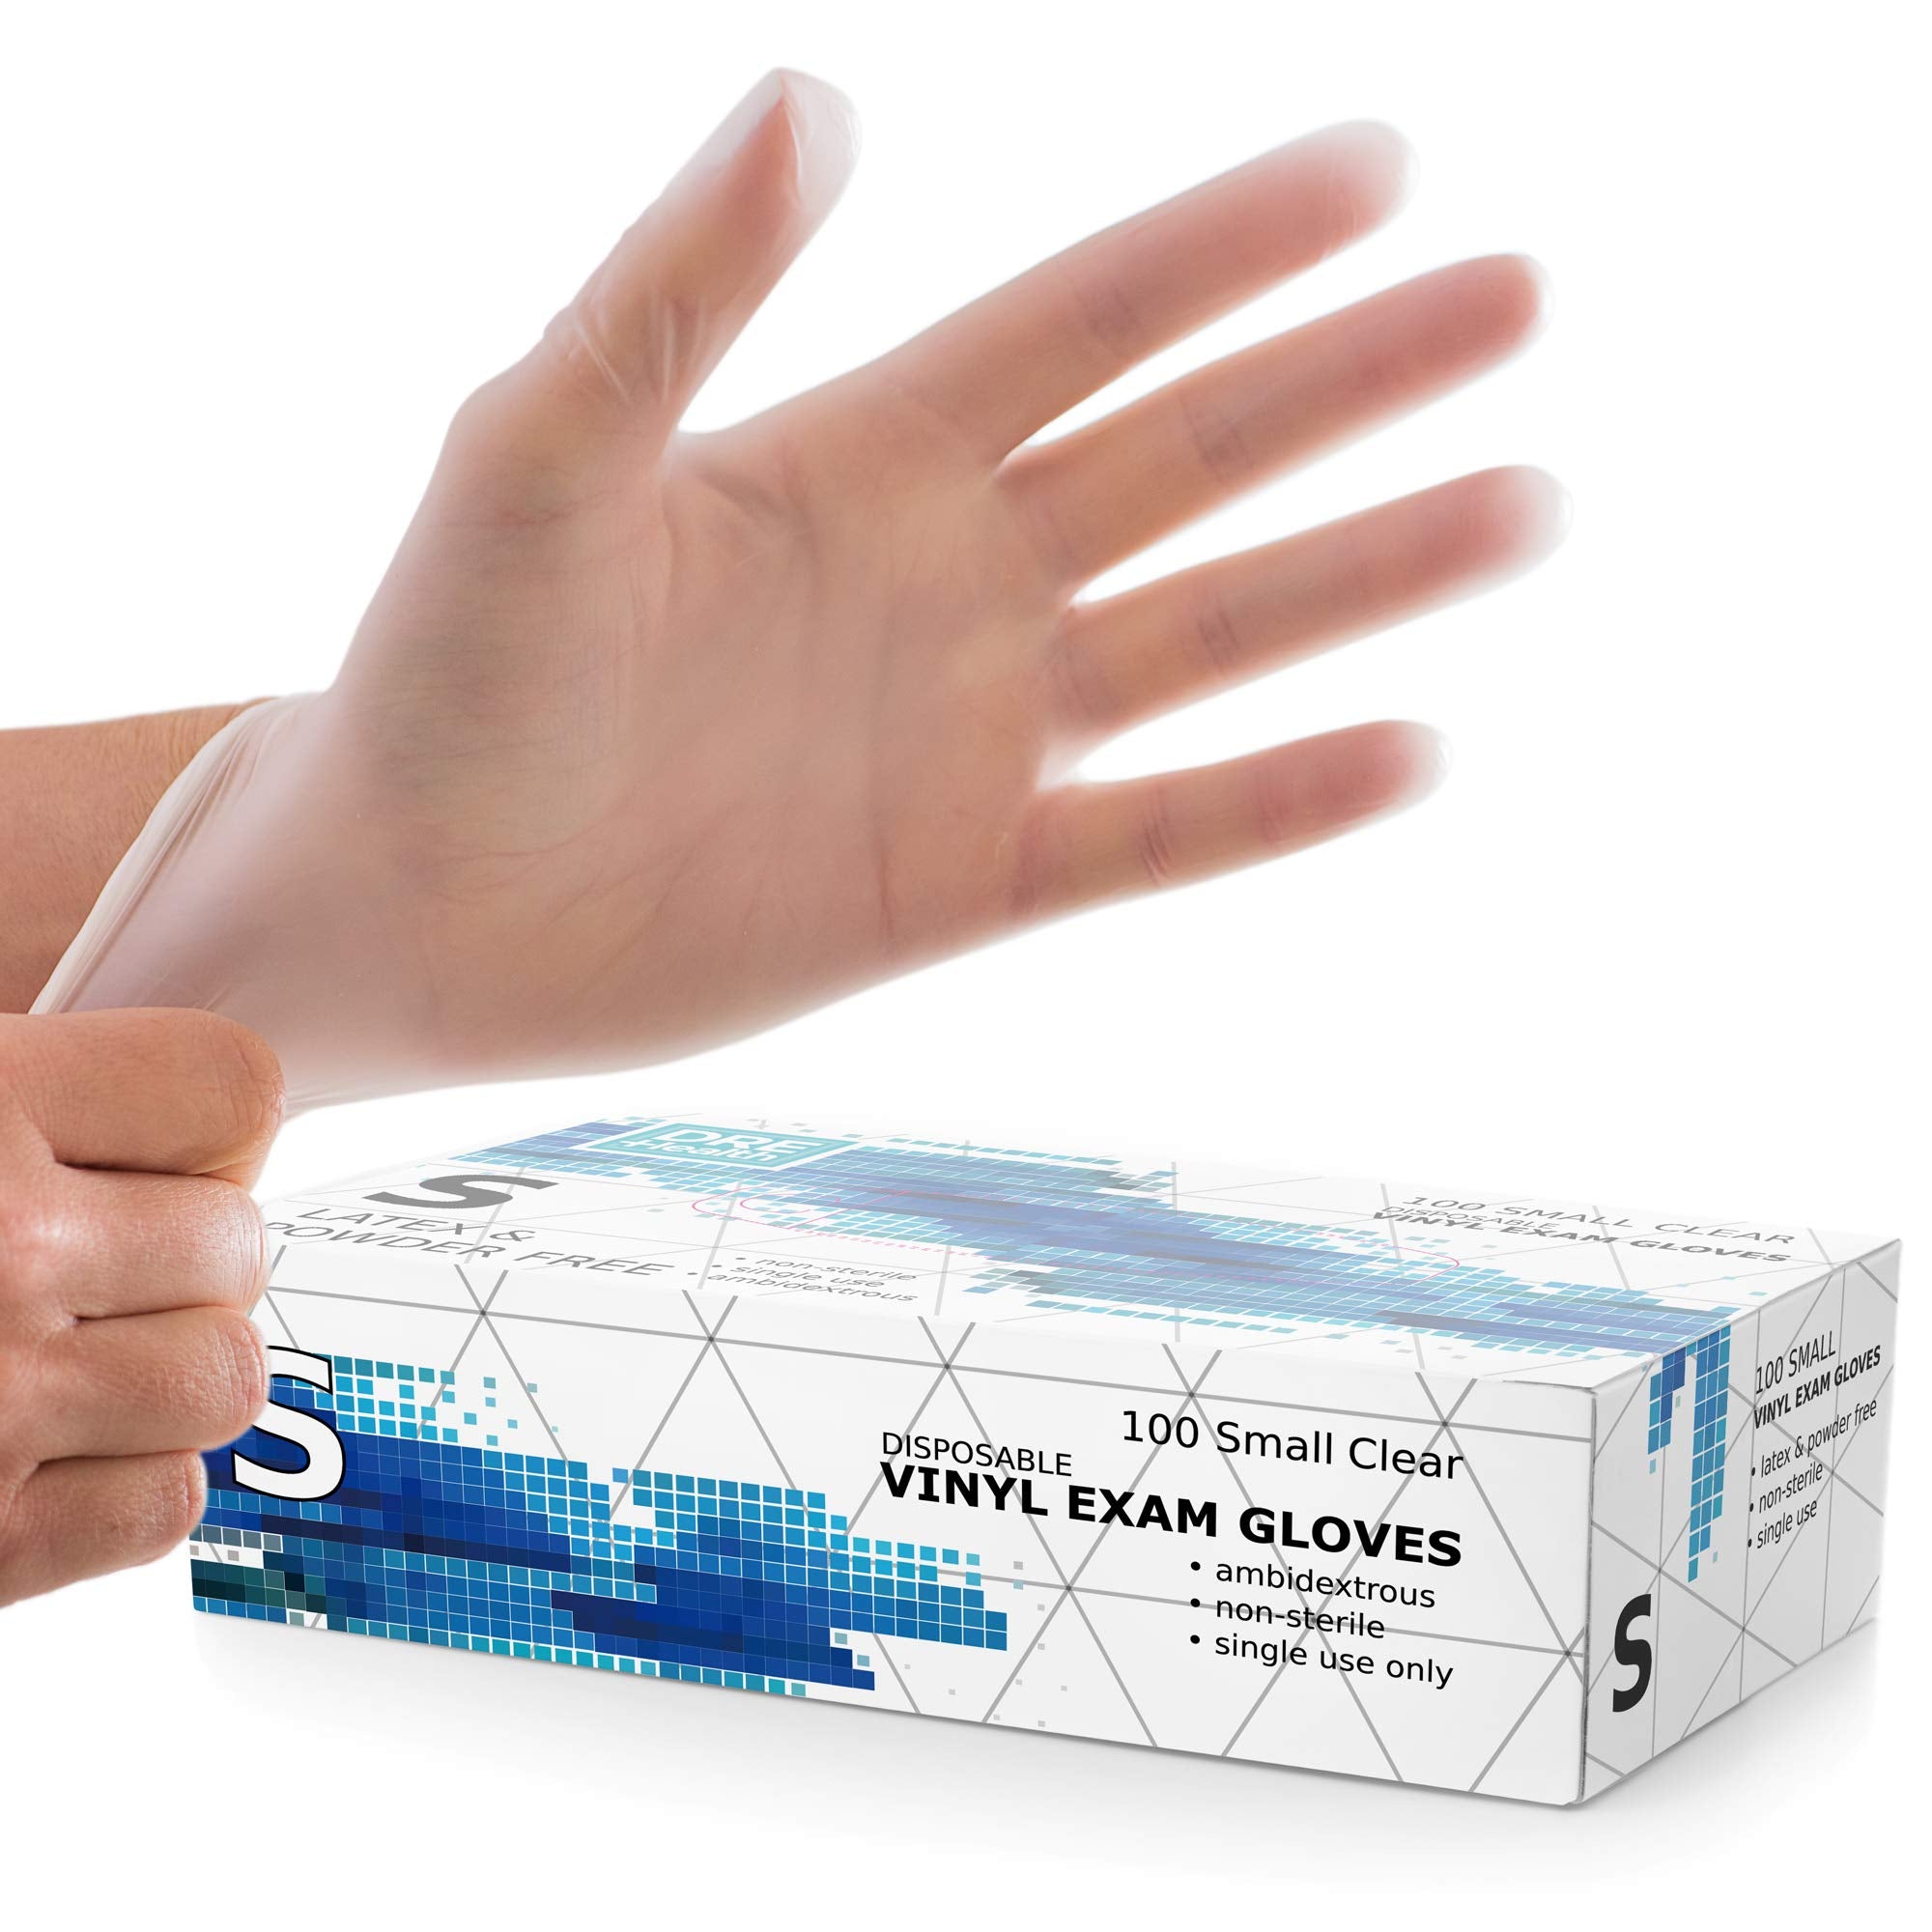 Powder Free Disposable Gloves -100 Pack -Clear Vinyl Medical Exam Gloves  - Like New